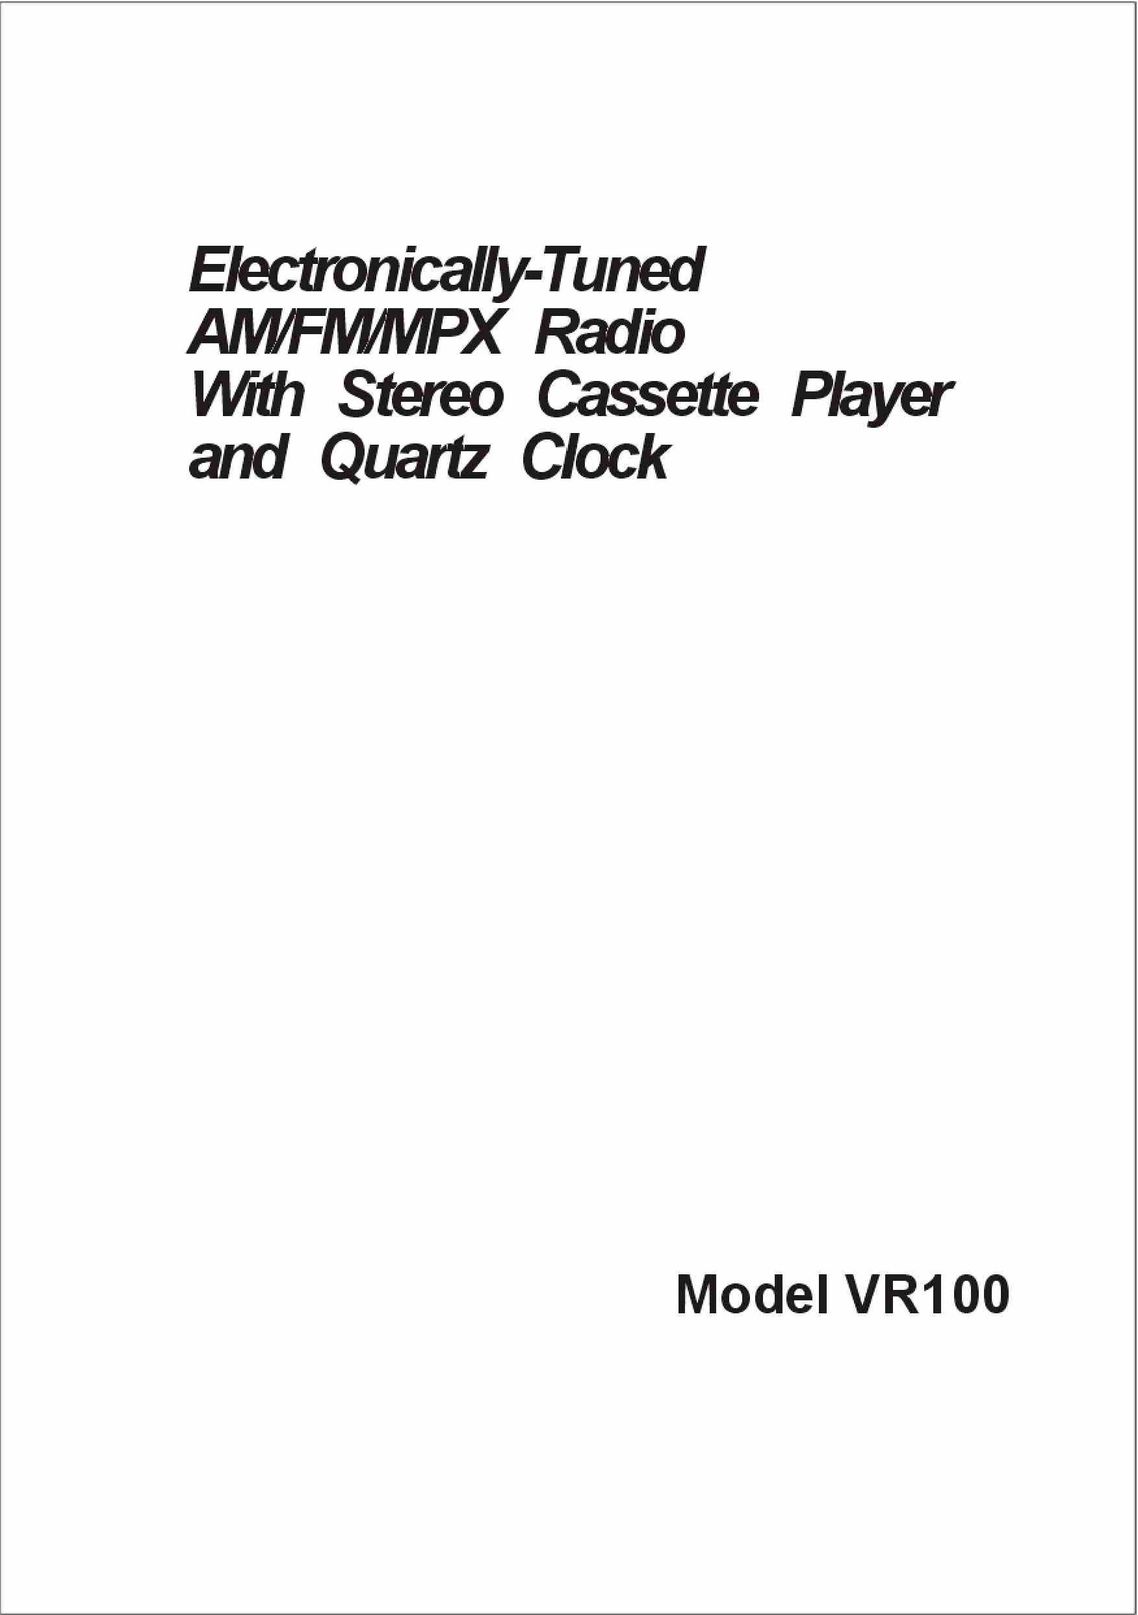 ASA Electronics VR100 Stereo System User Manual